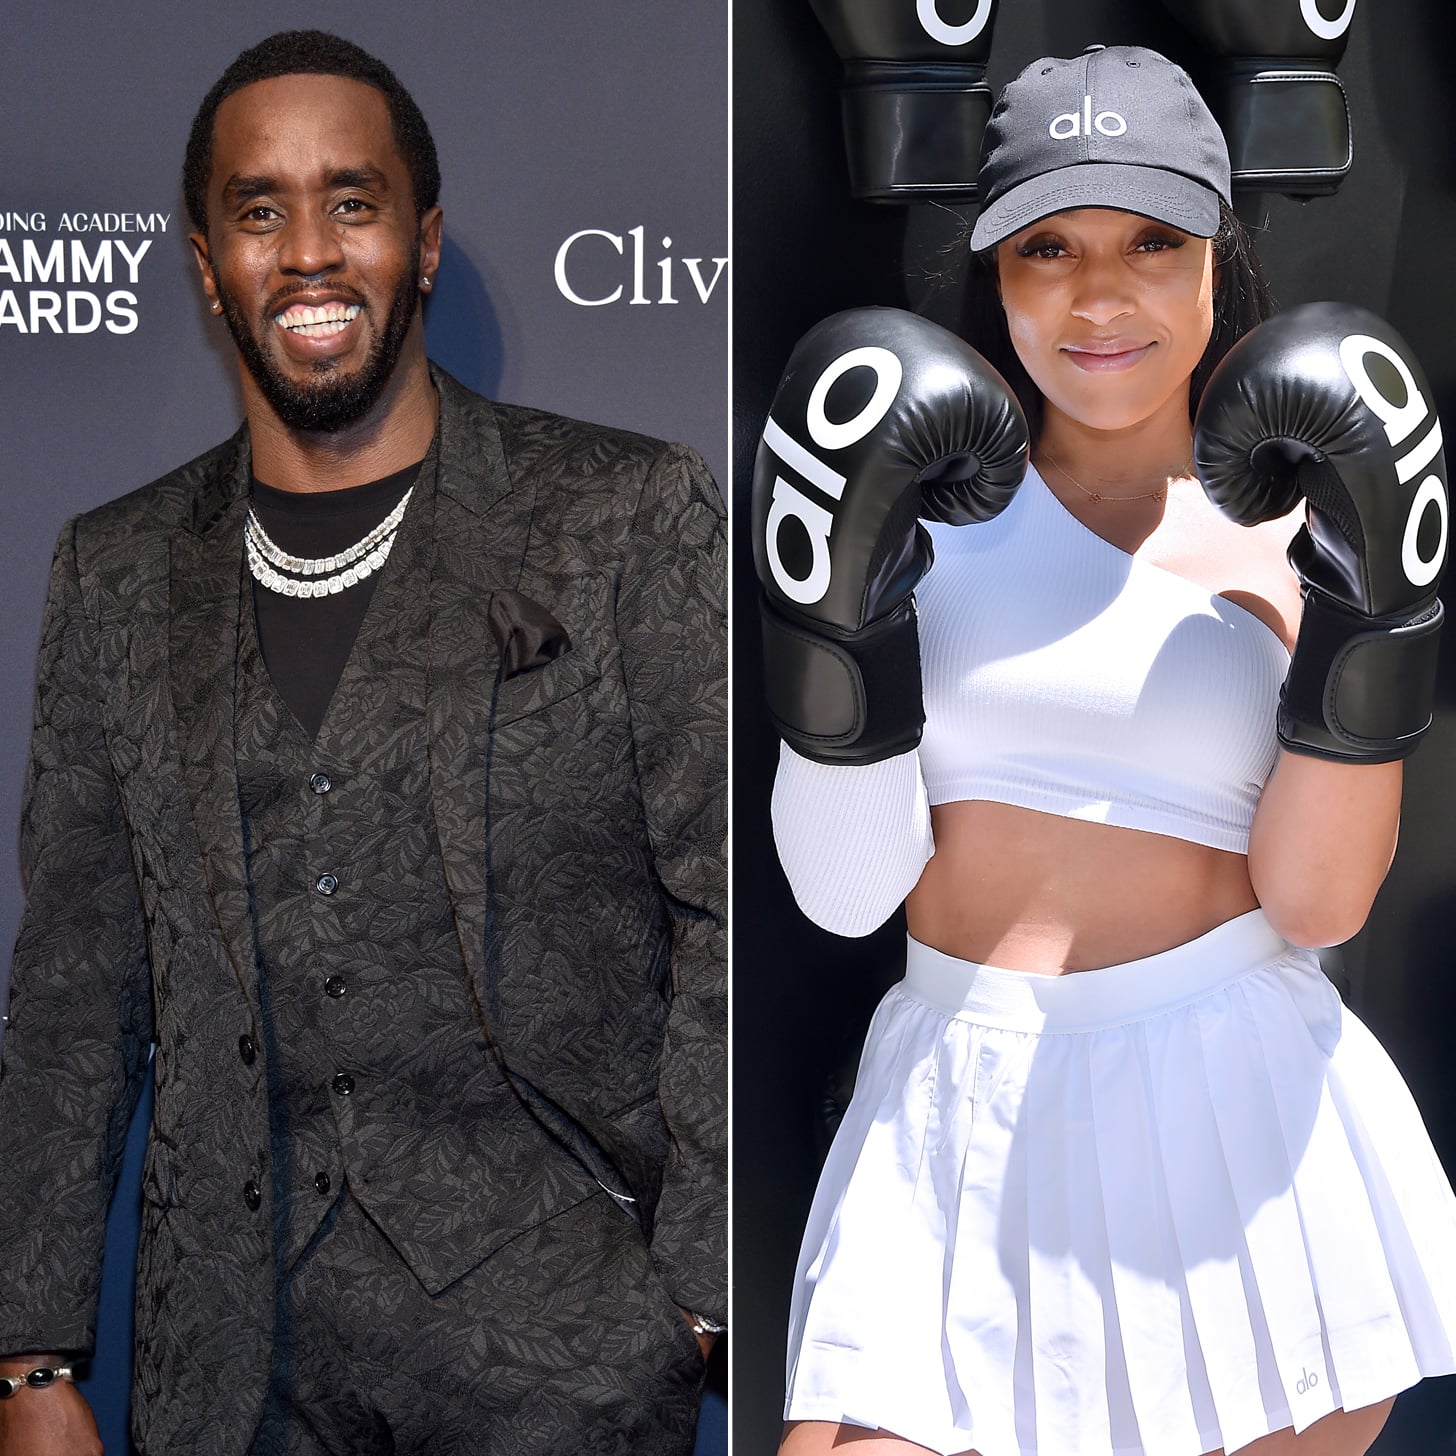 Joie Chavis and Diddy Spark Dating Rumors in Capri, Italy